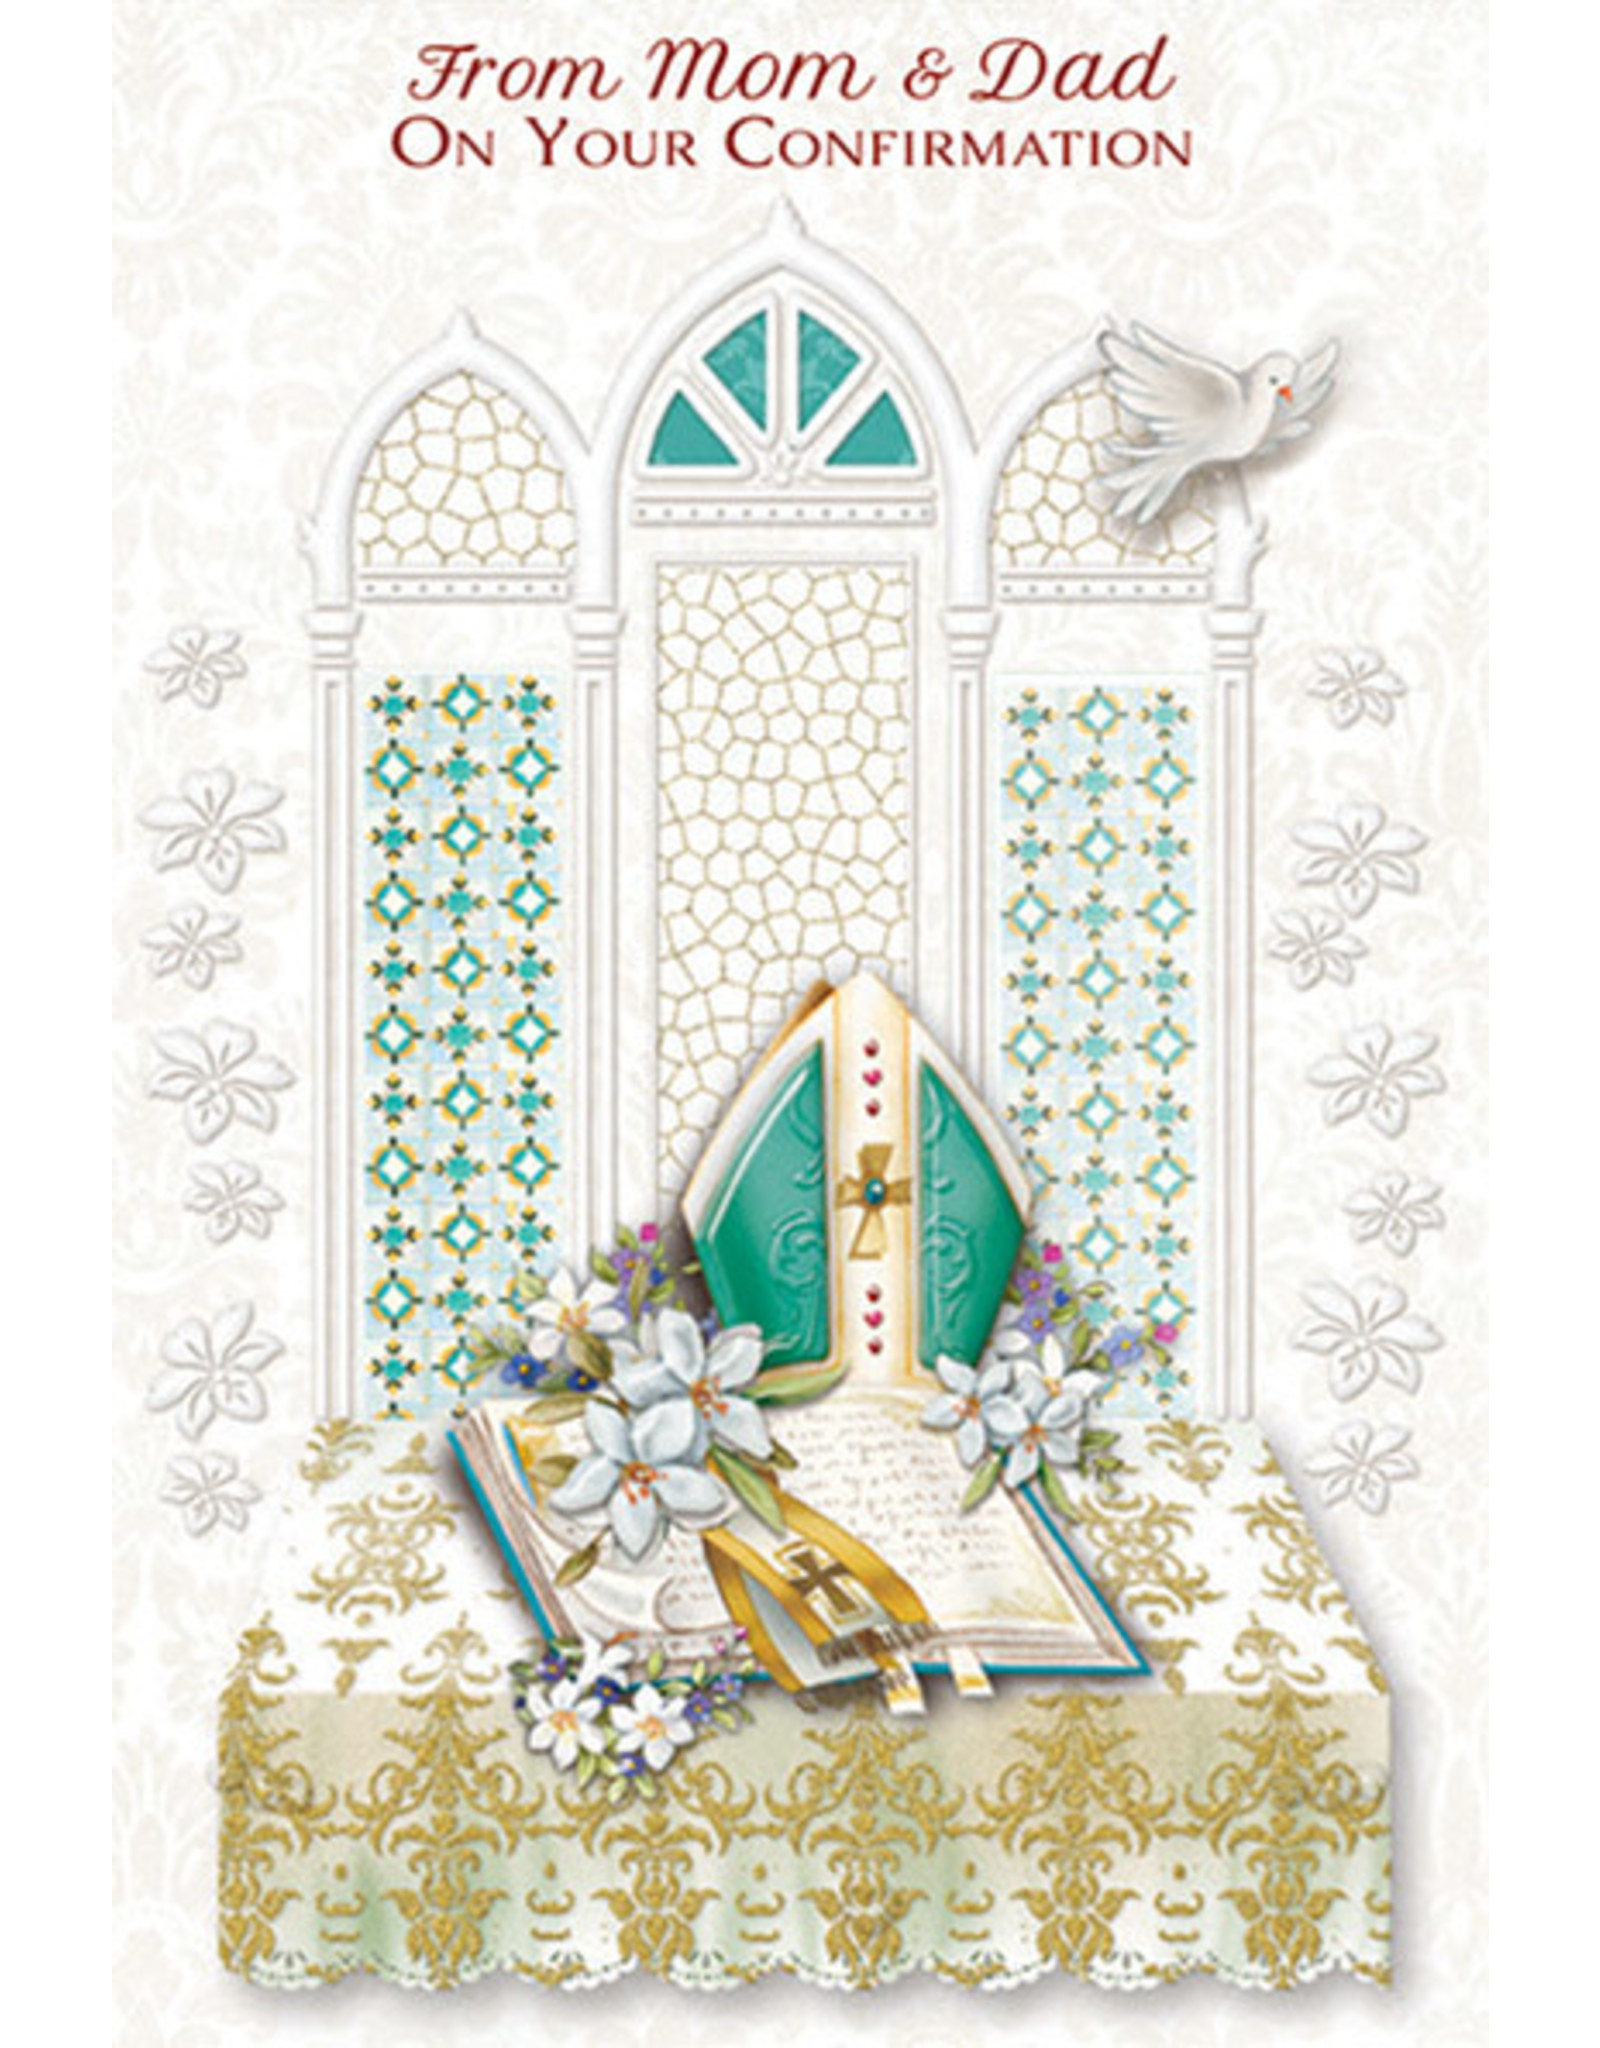 Greetings of Faith Card - Confirmation, from Mom & Dad, Pearl with Gold Foil Decor